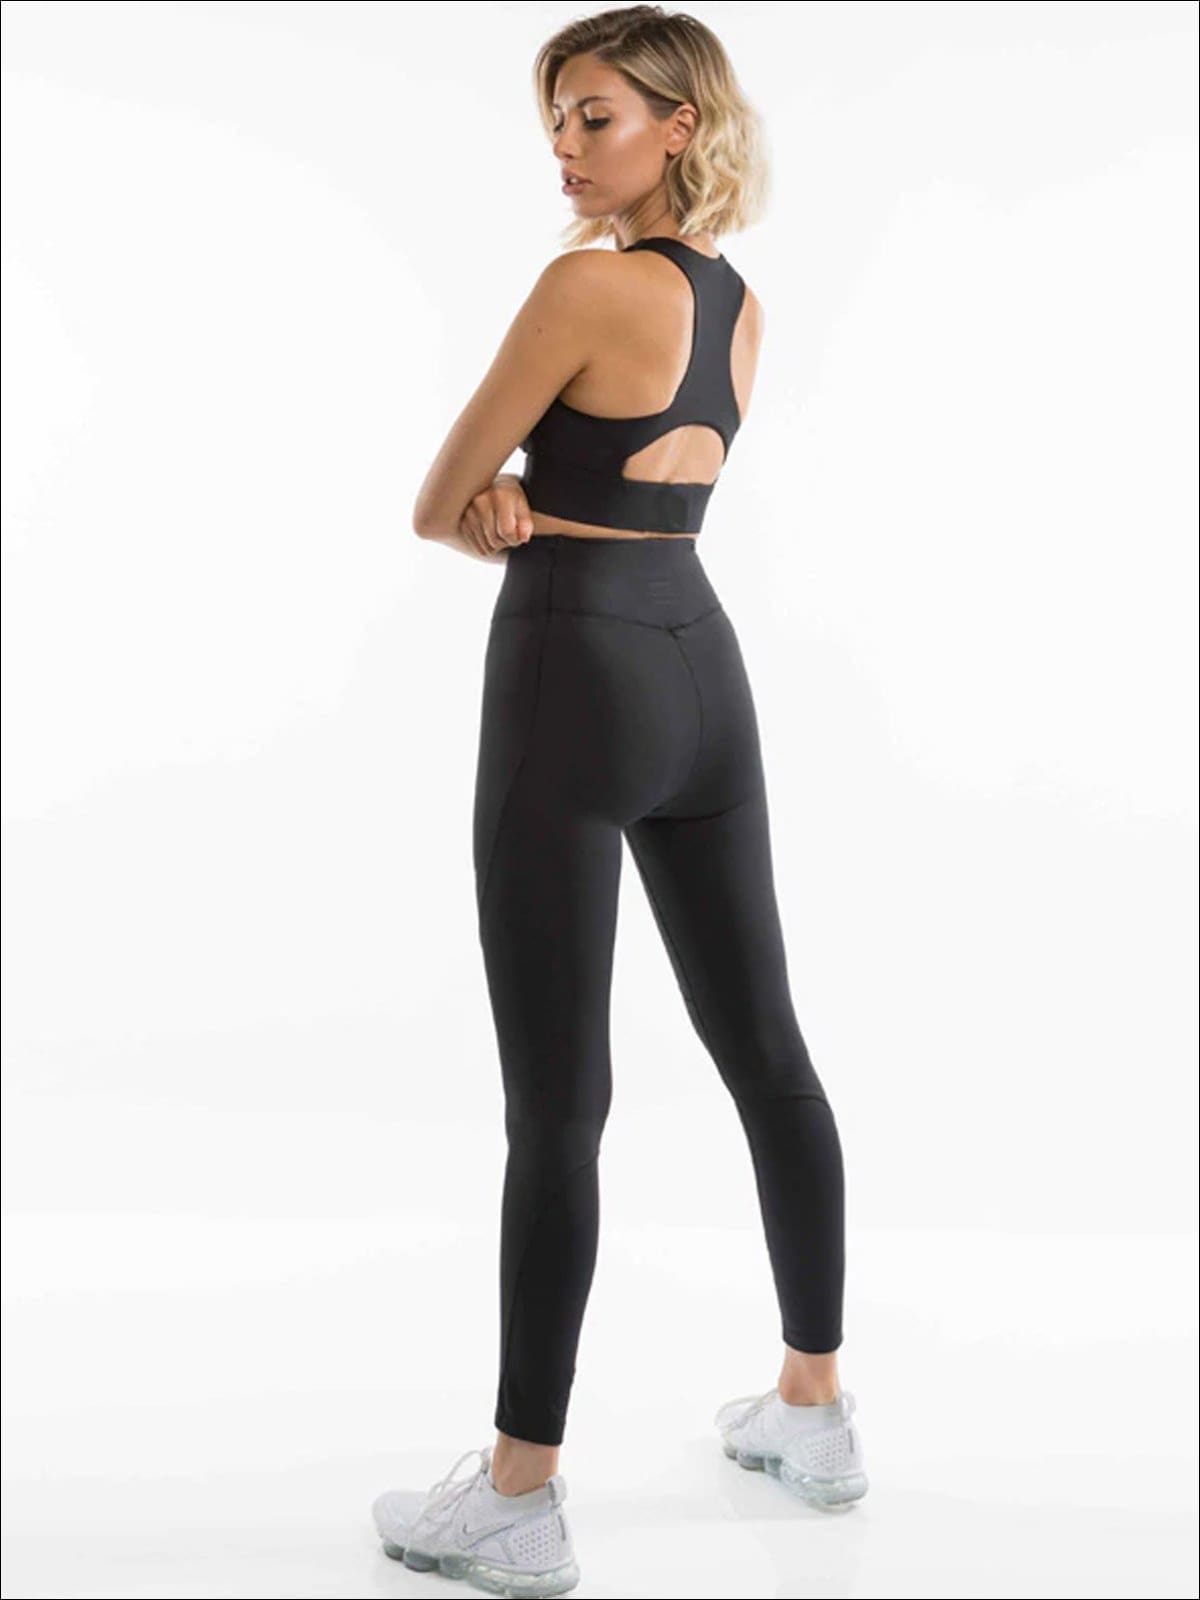 Cut It Out — Statement Activewear Sets With Cutouts & Curb Appeal